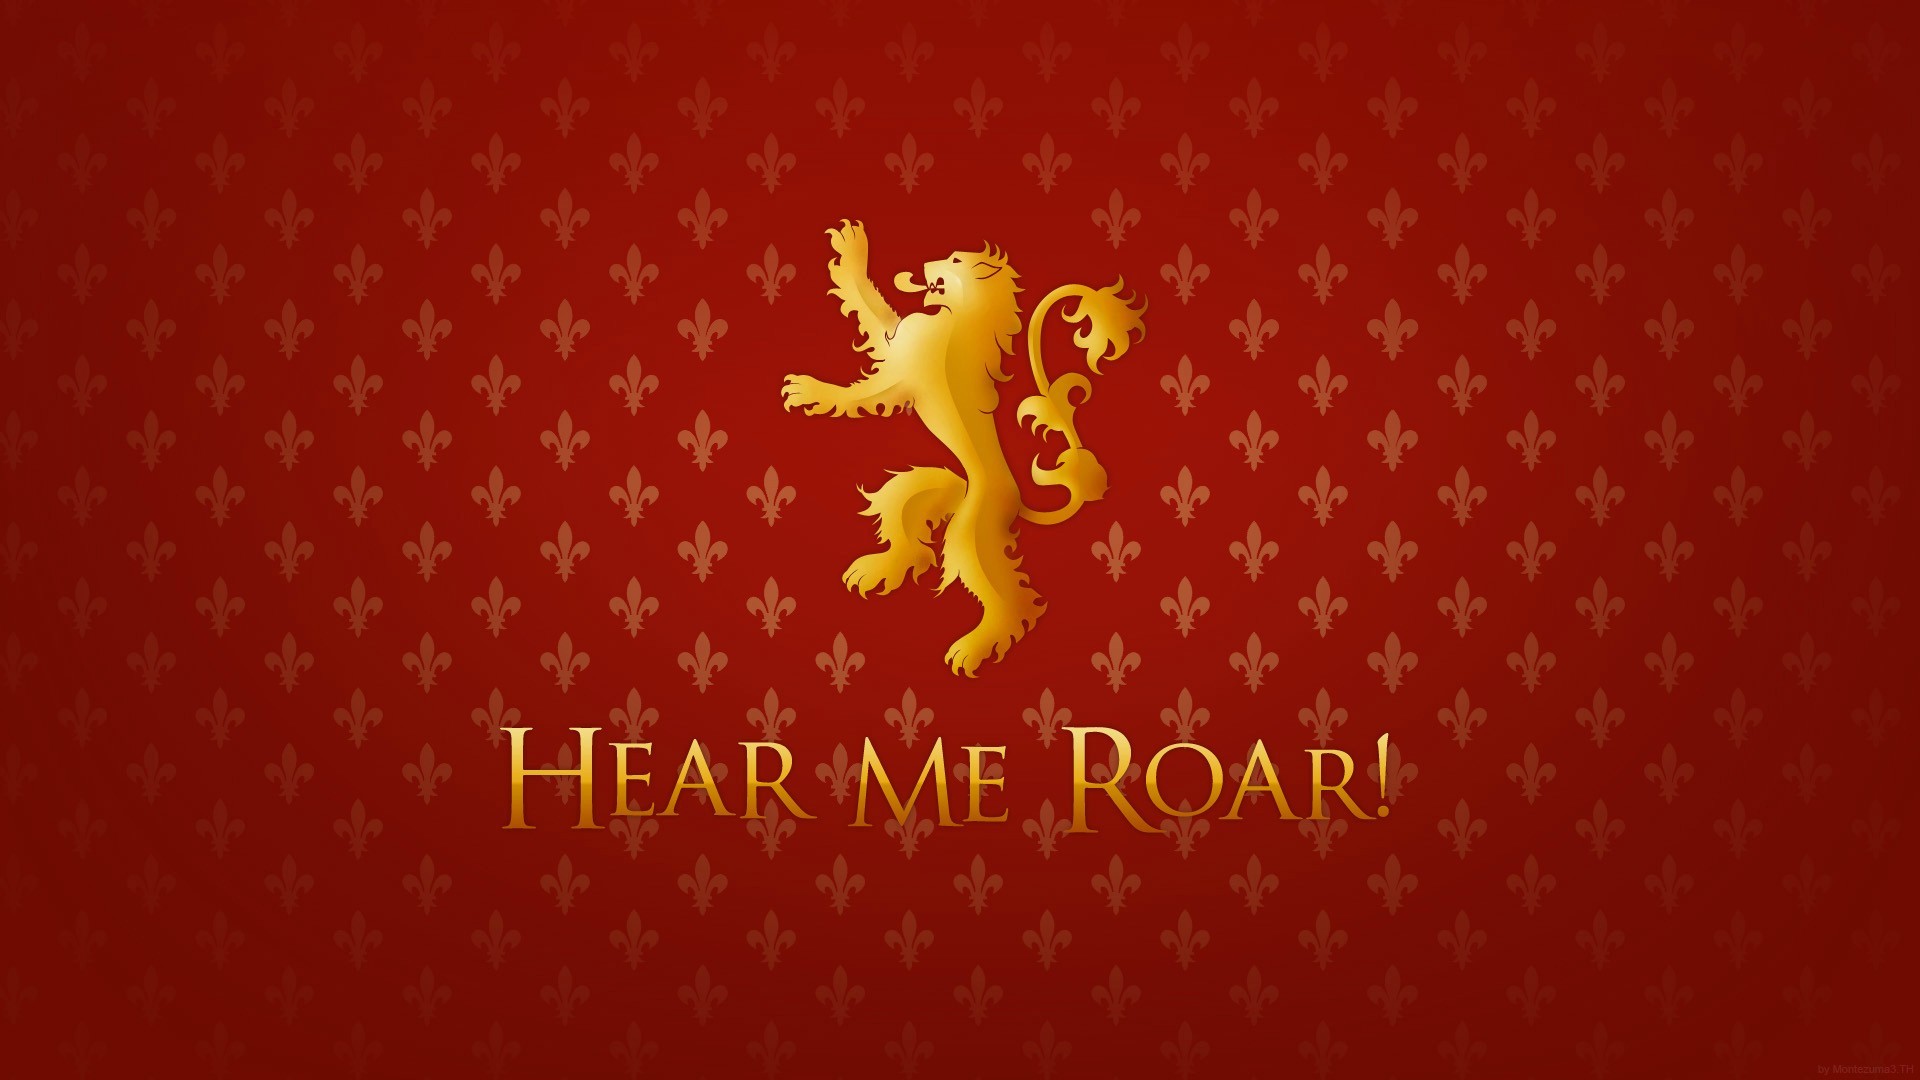 General 1920x1080 Game of Thrones sigils House Lannister TV series red background simple background